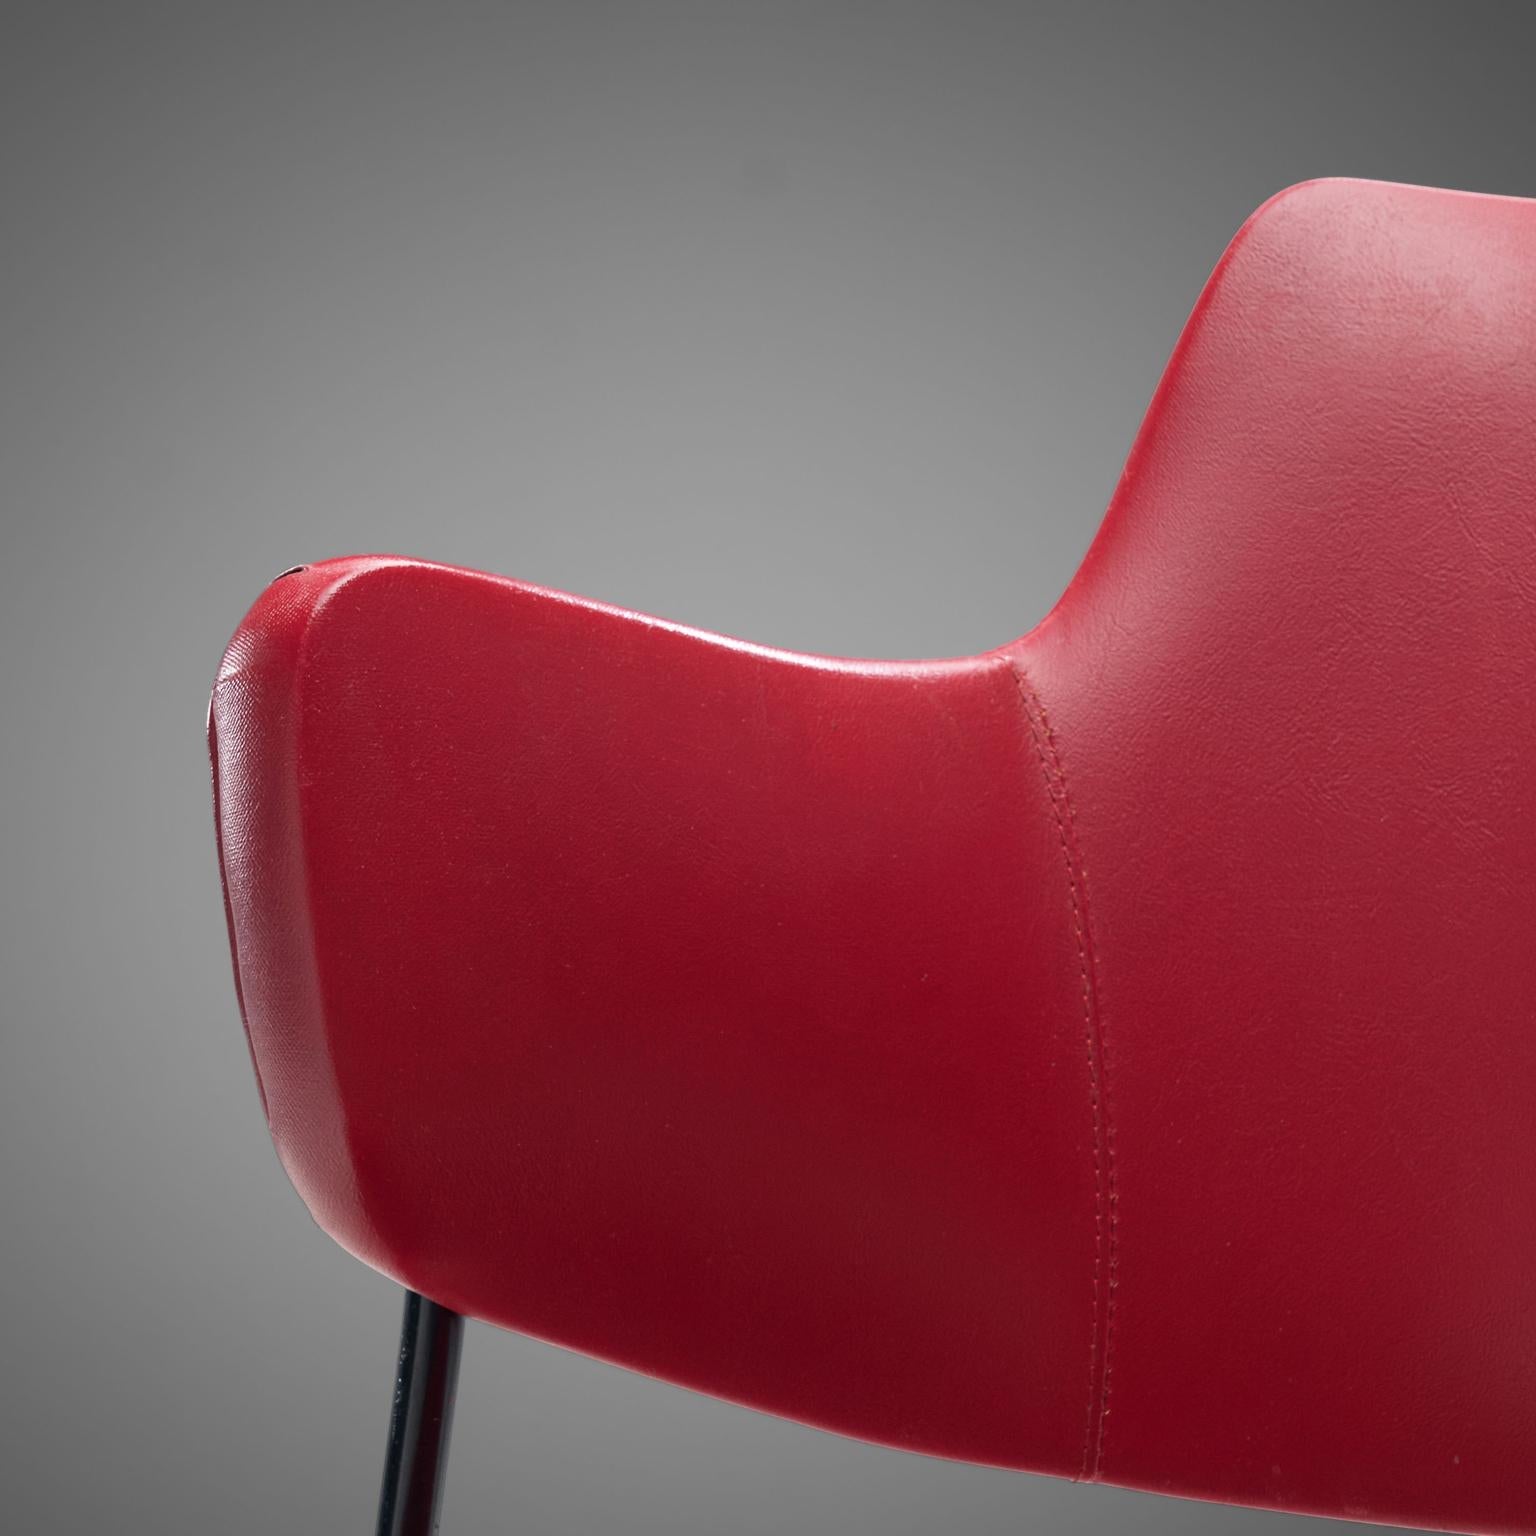 Wim Rietveld & W.H. Gispen for Kembo '205' Chairs in Red Leatherette